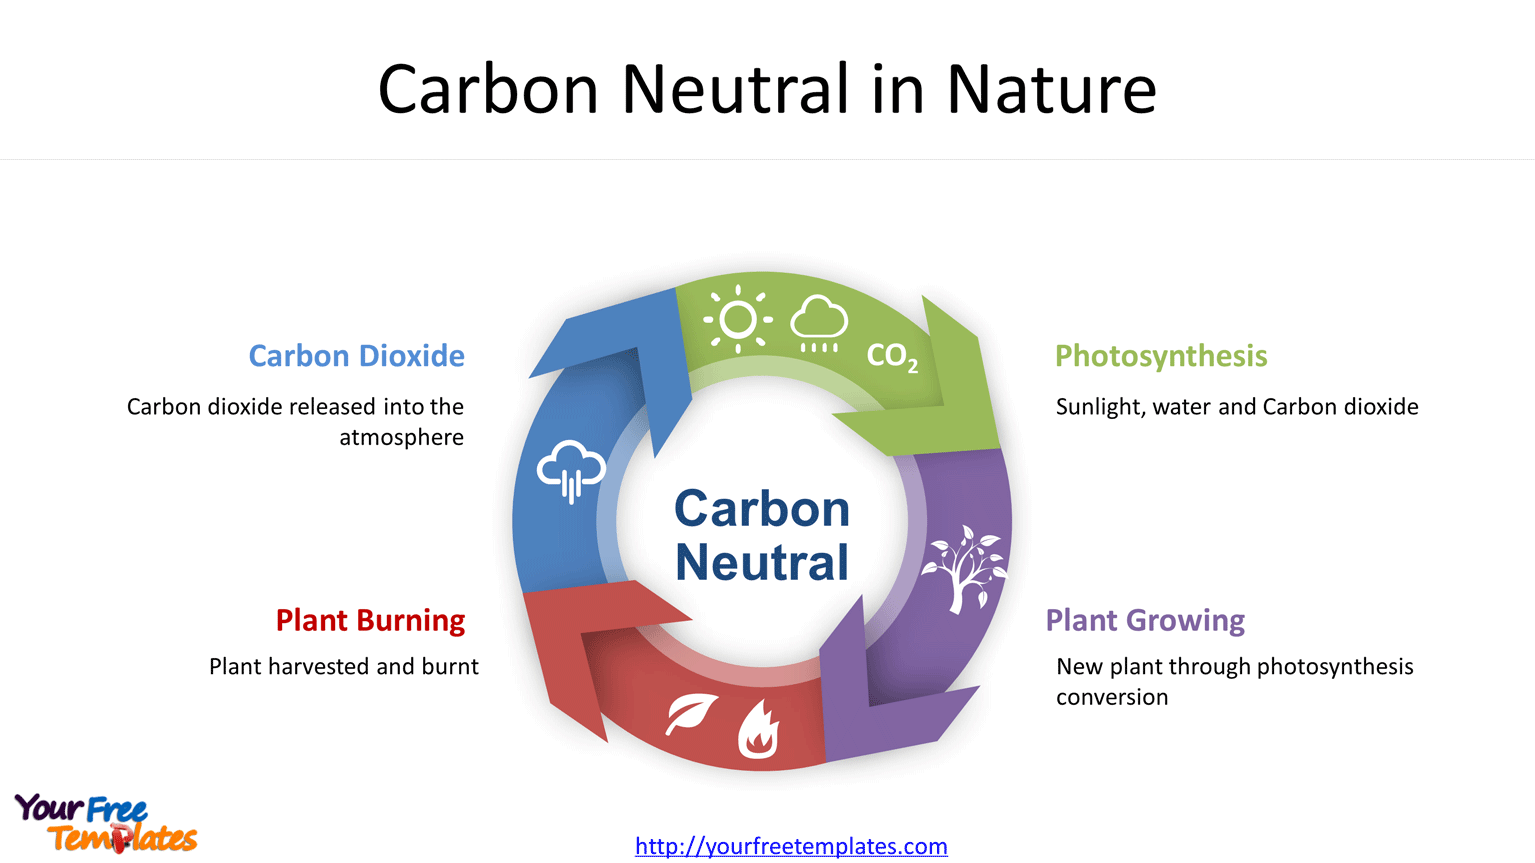 carbon balance diagram and icons to demonstrate the buzzword.